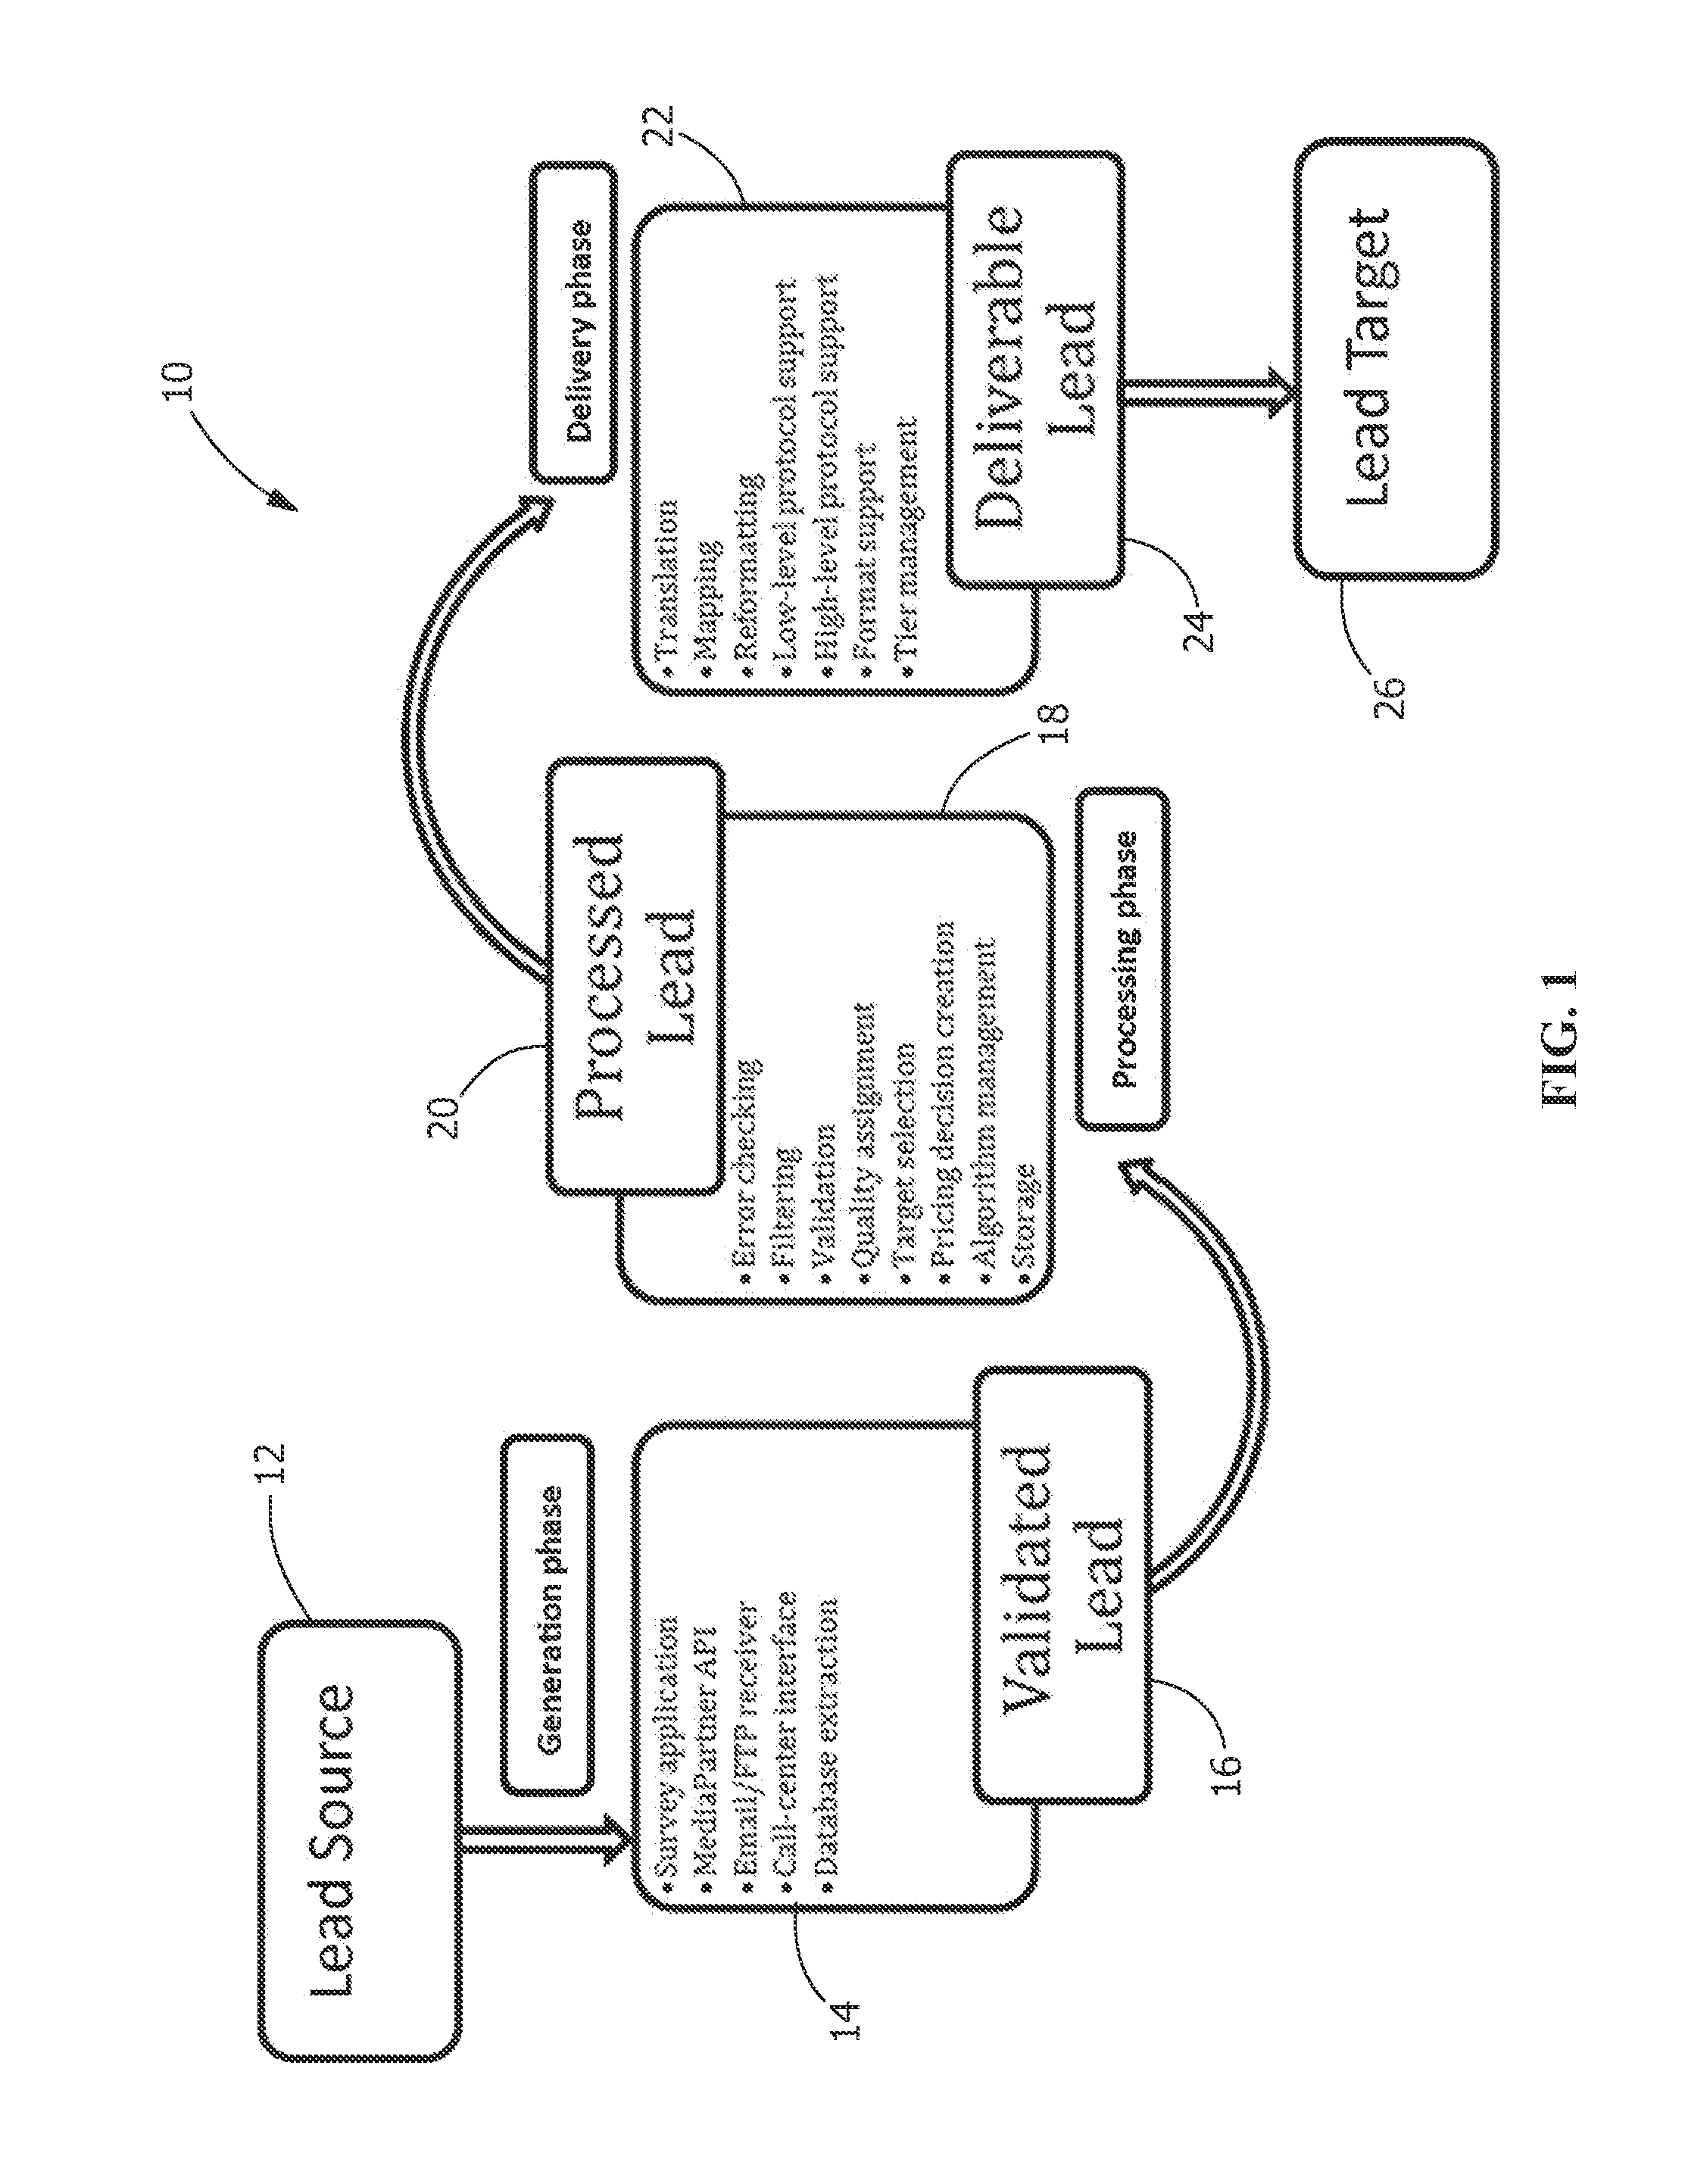 System and method of enhancing a lead exchange process